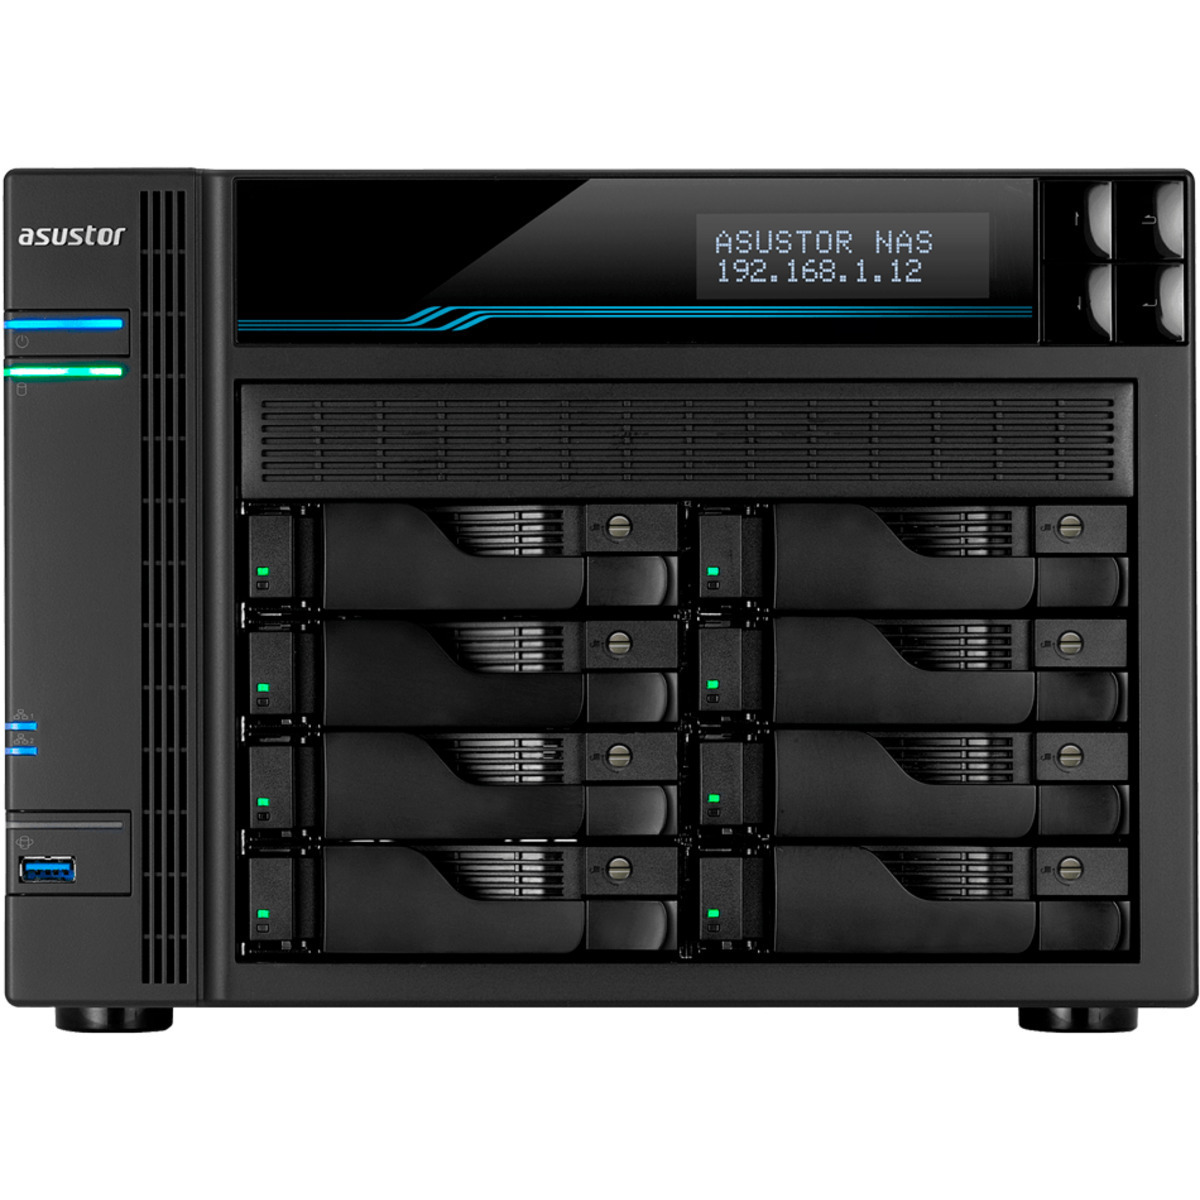 ASUSTOR AS6508T Lockerstor 8 112tb 8-Bay Desktop Multimedia / Power User / Business NAS - Network Attached Storage Device 7x16tb Seagate IronWolf Pro ST16000NT001 3.5 7200rpm SATA 6Gb/s HDD NAS Class Drives Installed - Burn-In Tested - ON SALE - FREE RAM UPGRADE AS6508T Lockerstor 8